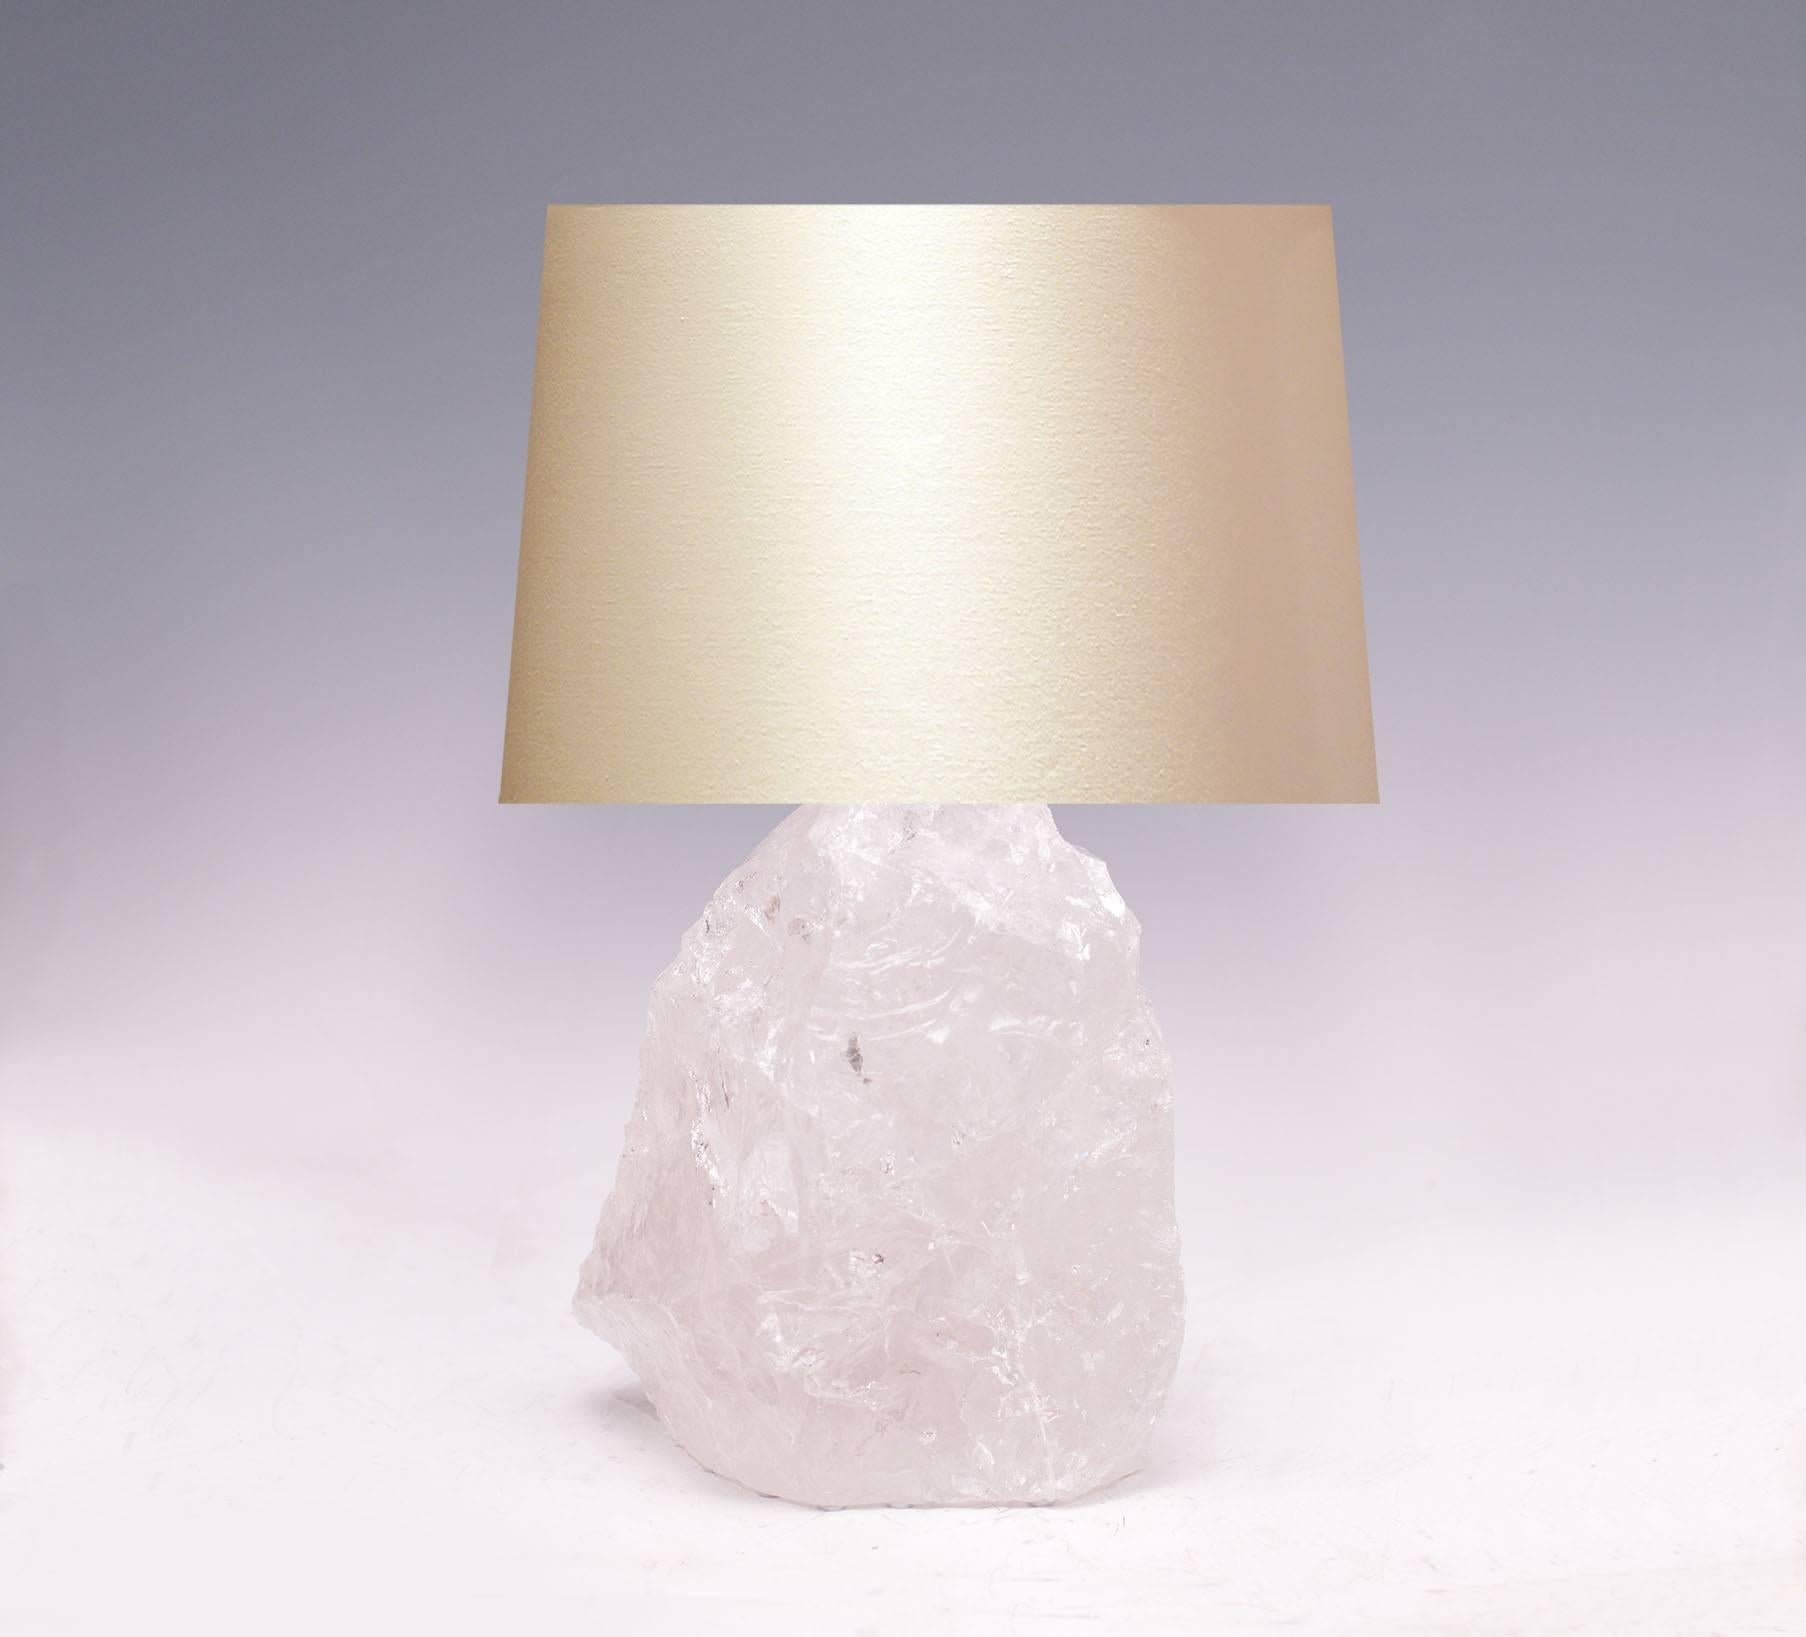 Natural rock crystal quartz mounted as a lamp, created by Phoenix gallery, NYC.
To the rock crystal: 12